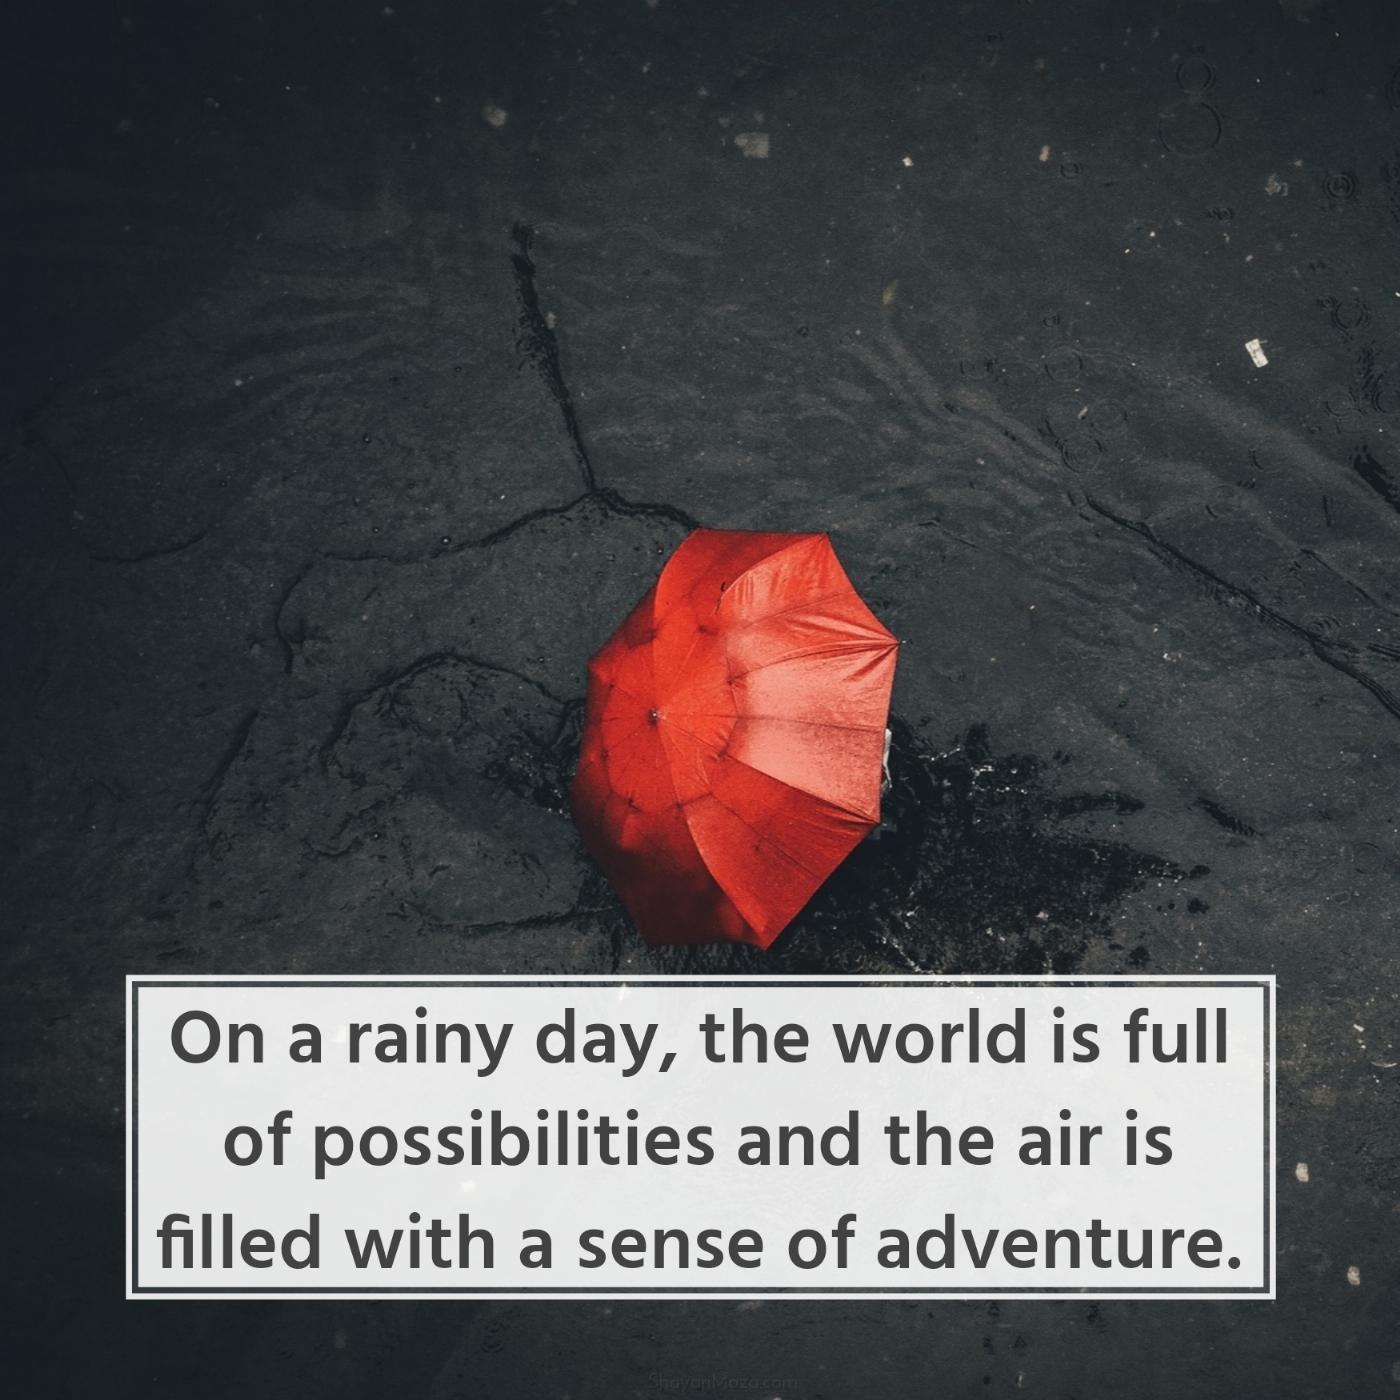 On a rainy day the world is full of possibilities